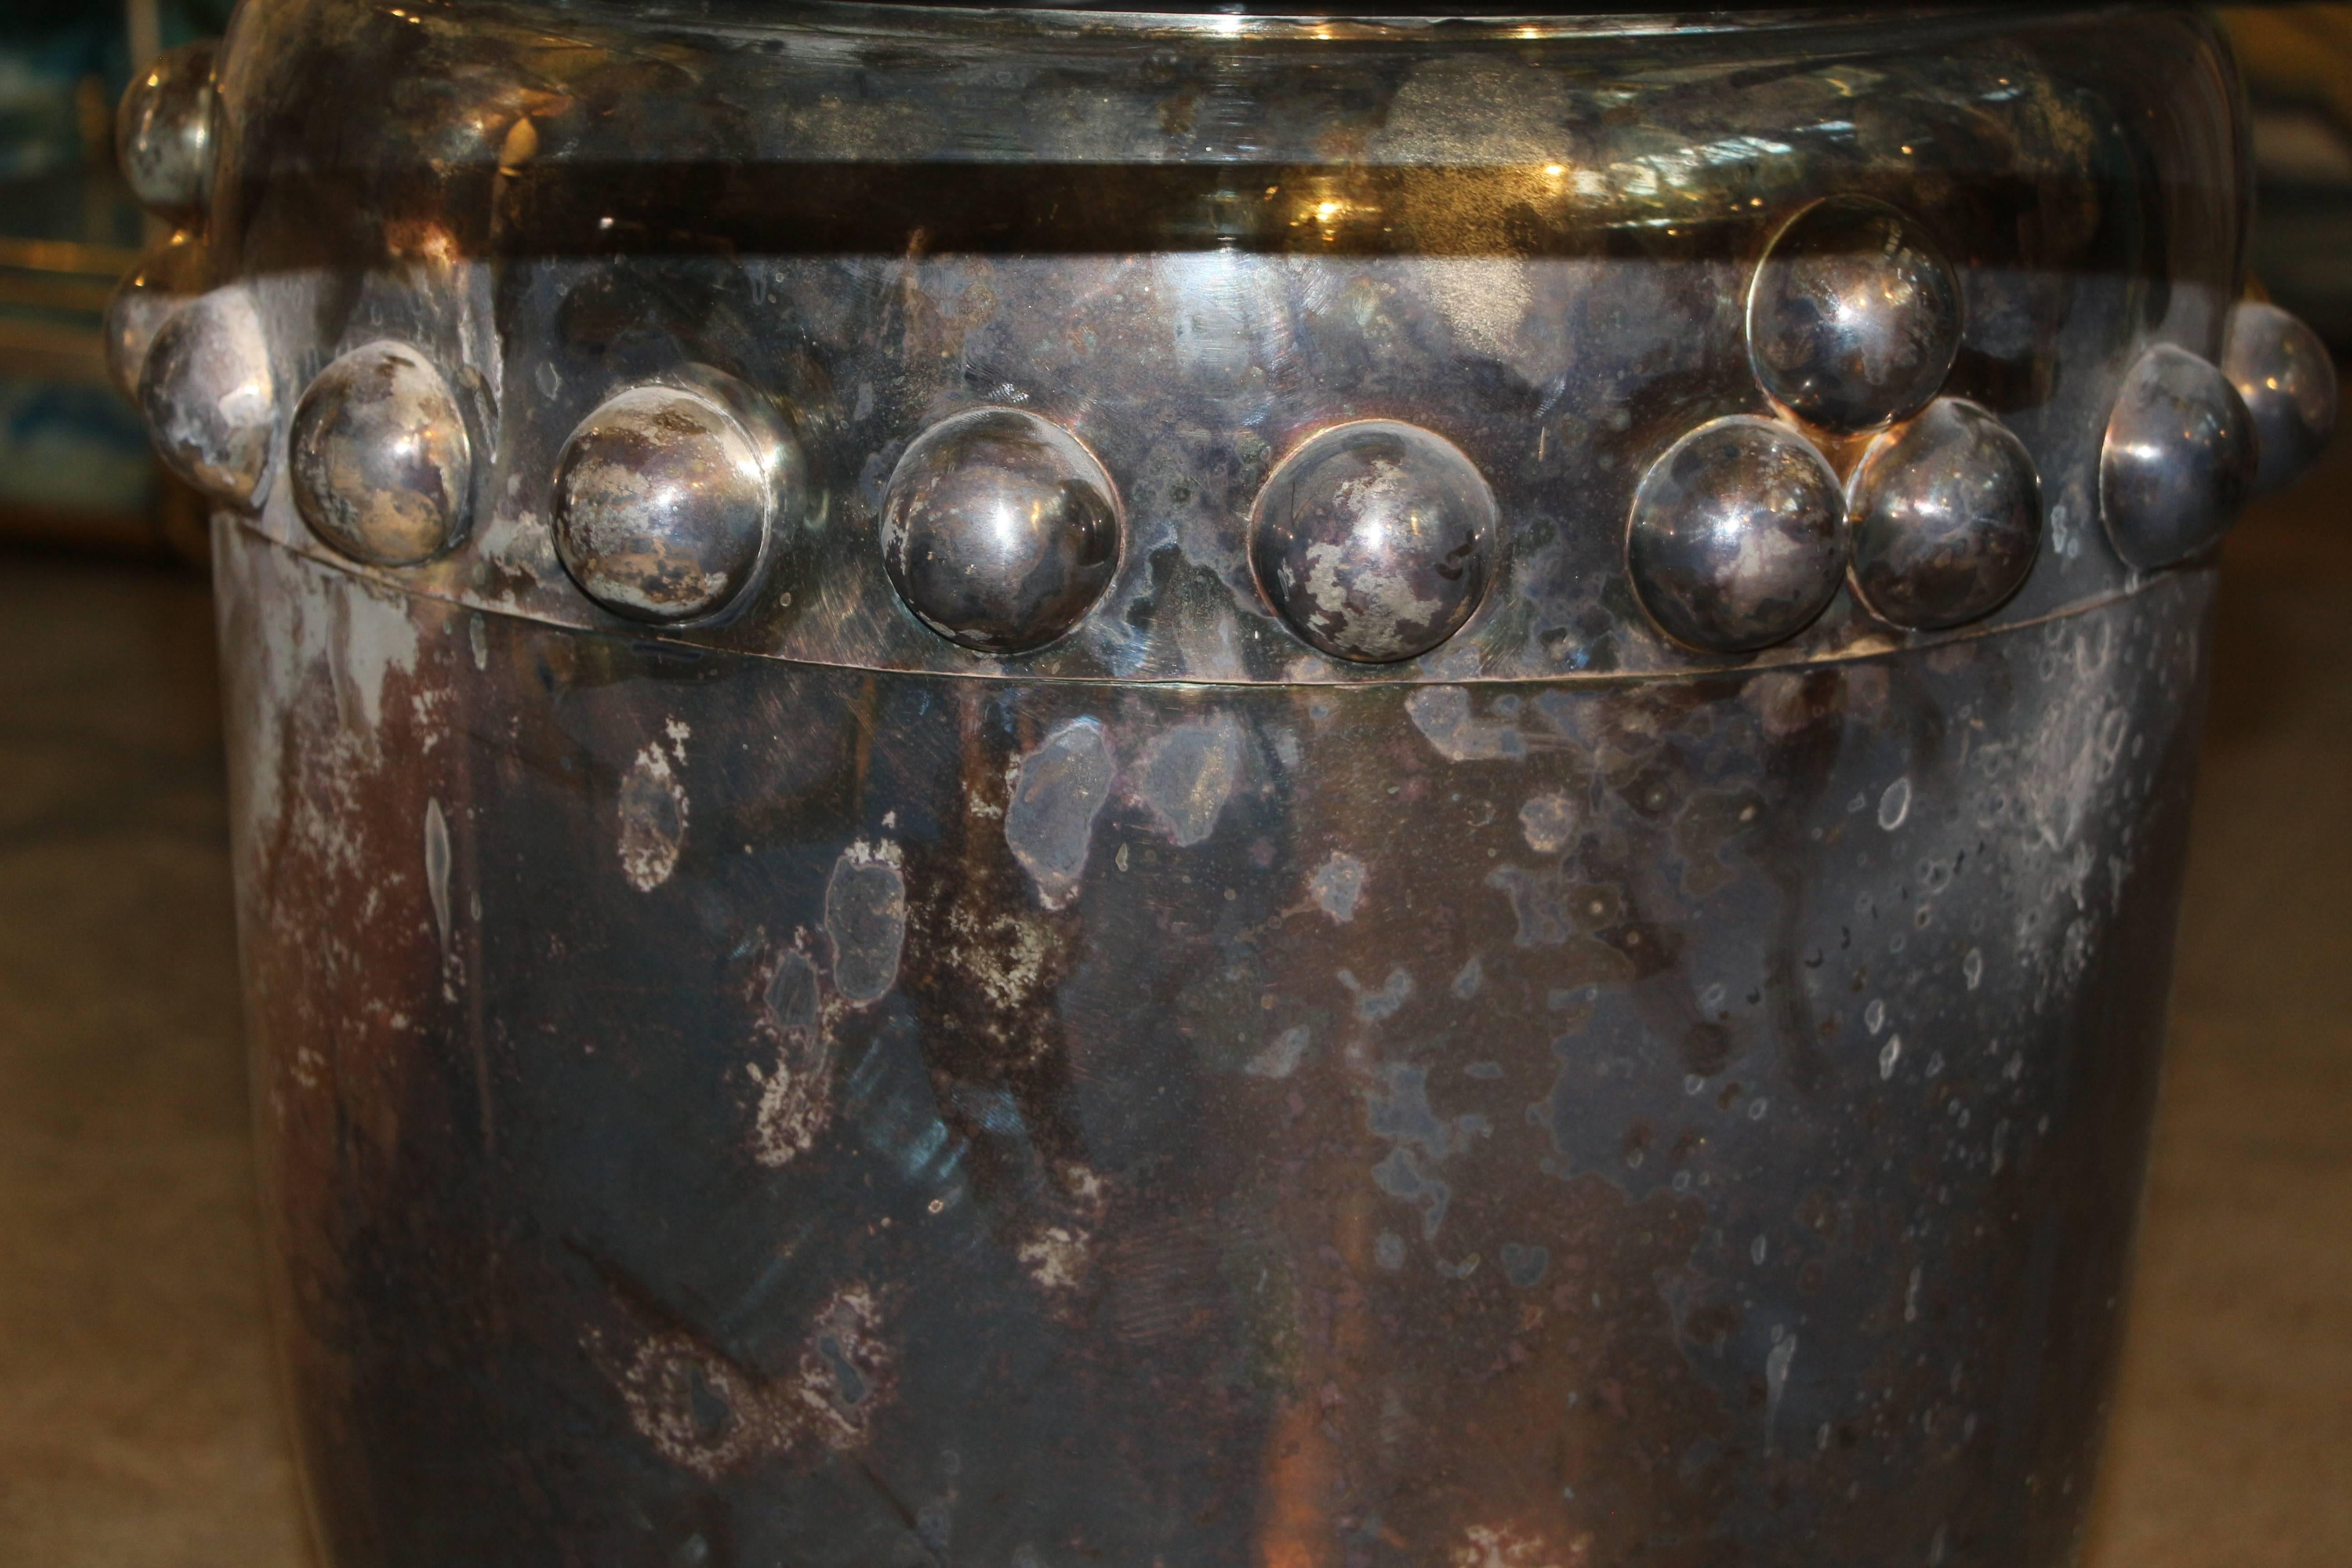 An nice silver plated Asian drum that has been made into a table by adding a 36 inch diameter piece of glass. The top is quite a bit dented and out of round. The base and top have silver loss and quite a few nicks, dent s and imperfections. These